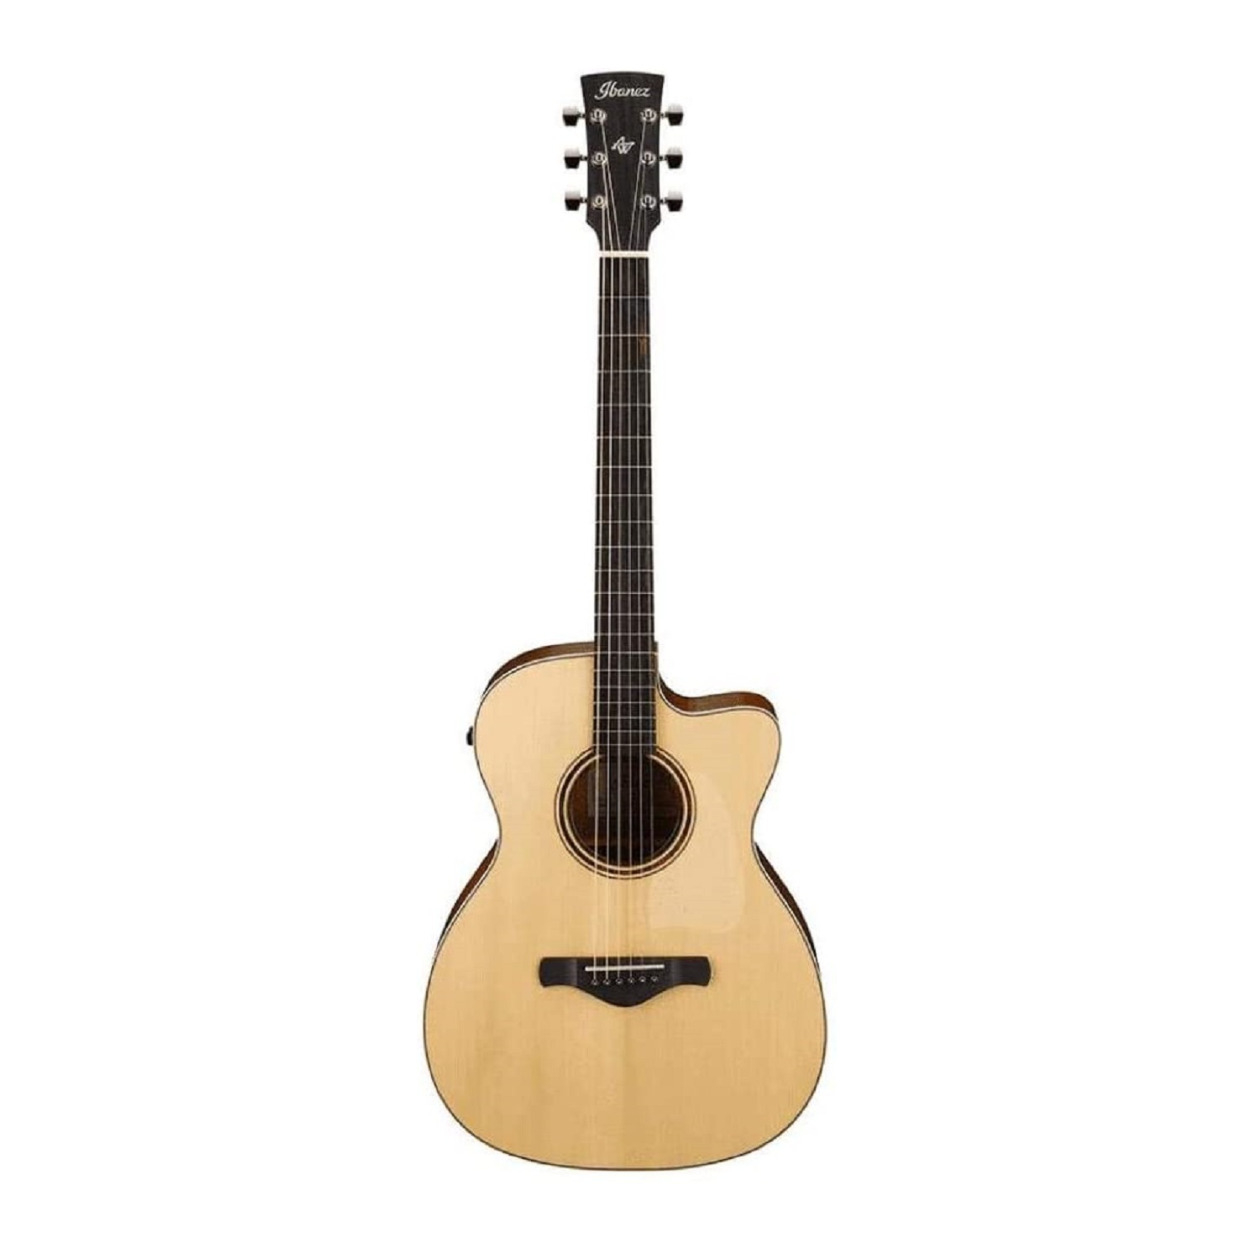 Ibanez Artwood ACFS300CE 6-String Acoustic Guitar (Right-Hand, Open Pore Semi-Gloss) in Natural -  ACFS300CEOPS